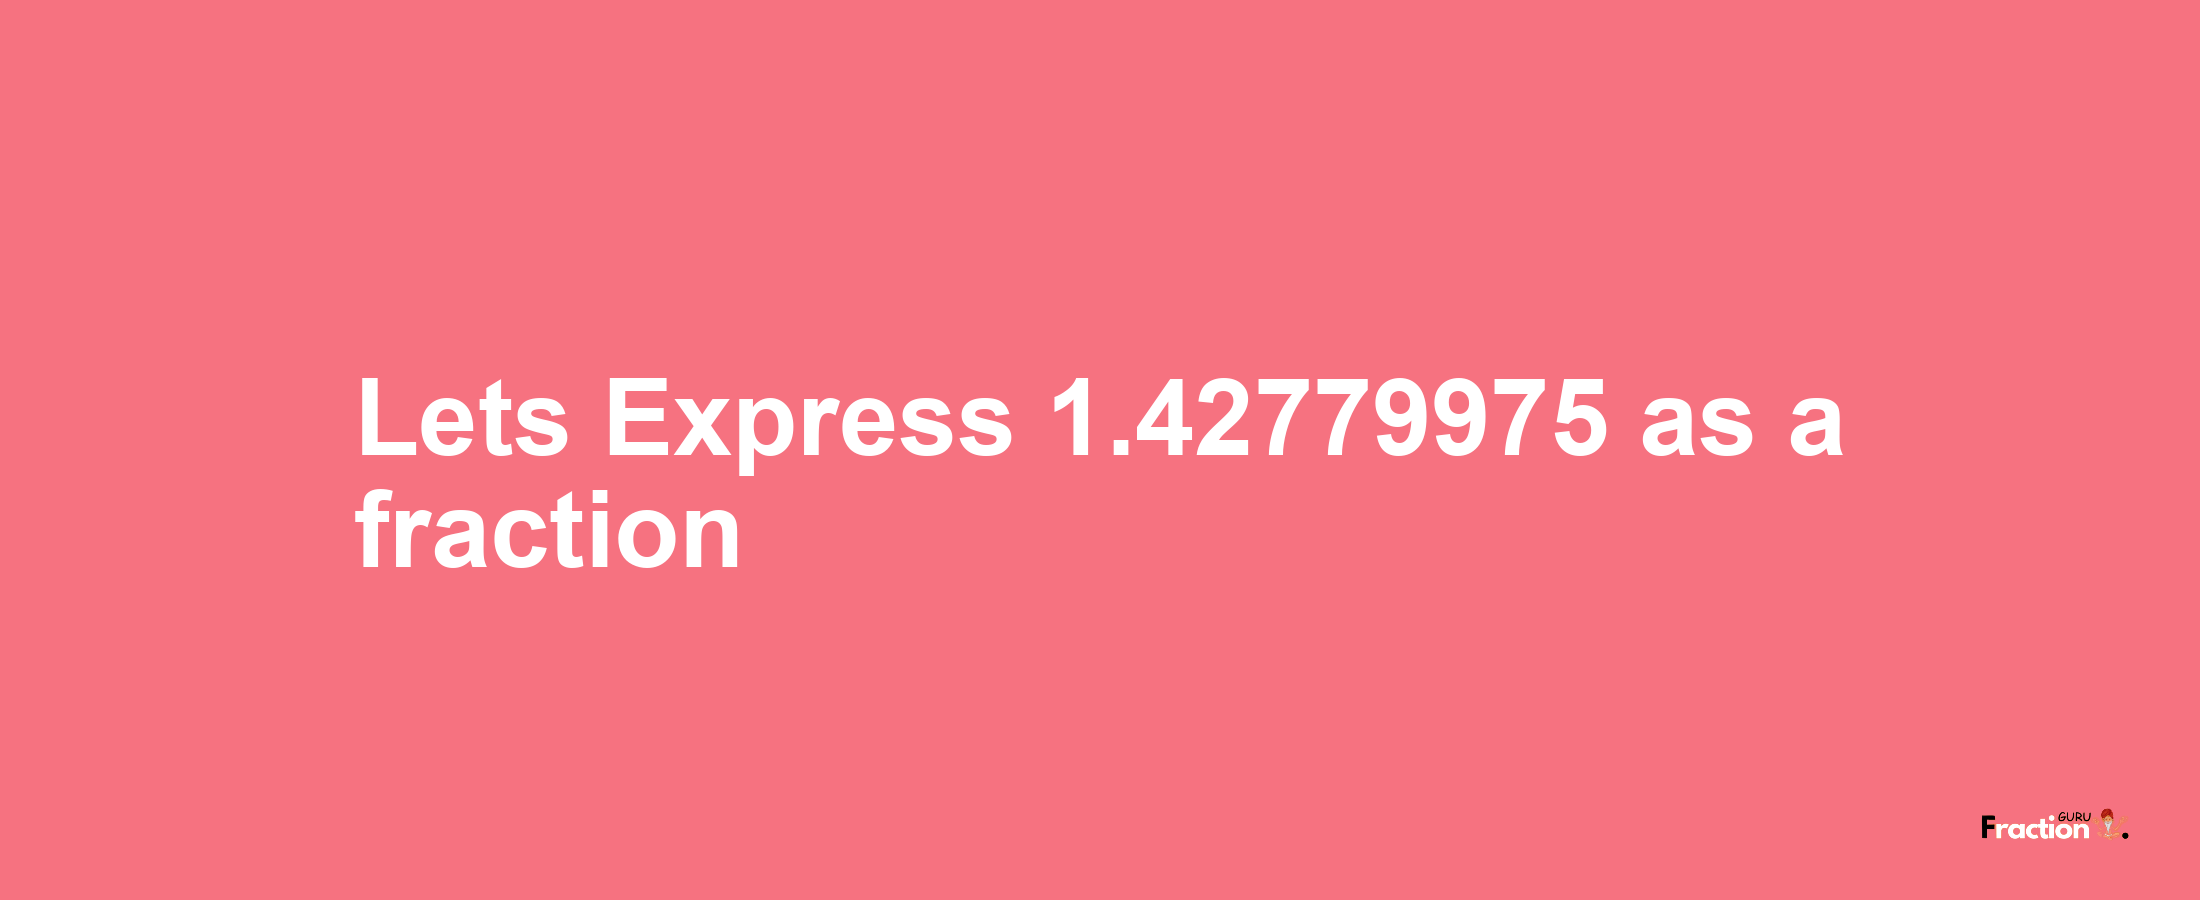 Lets Express 1.42779975 as afraction